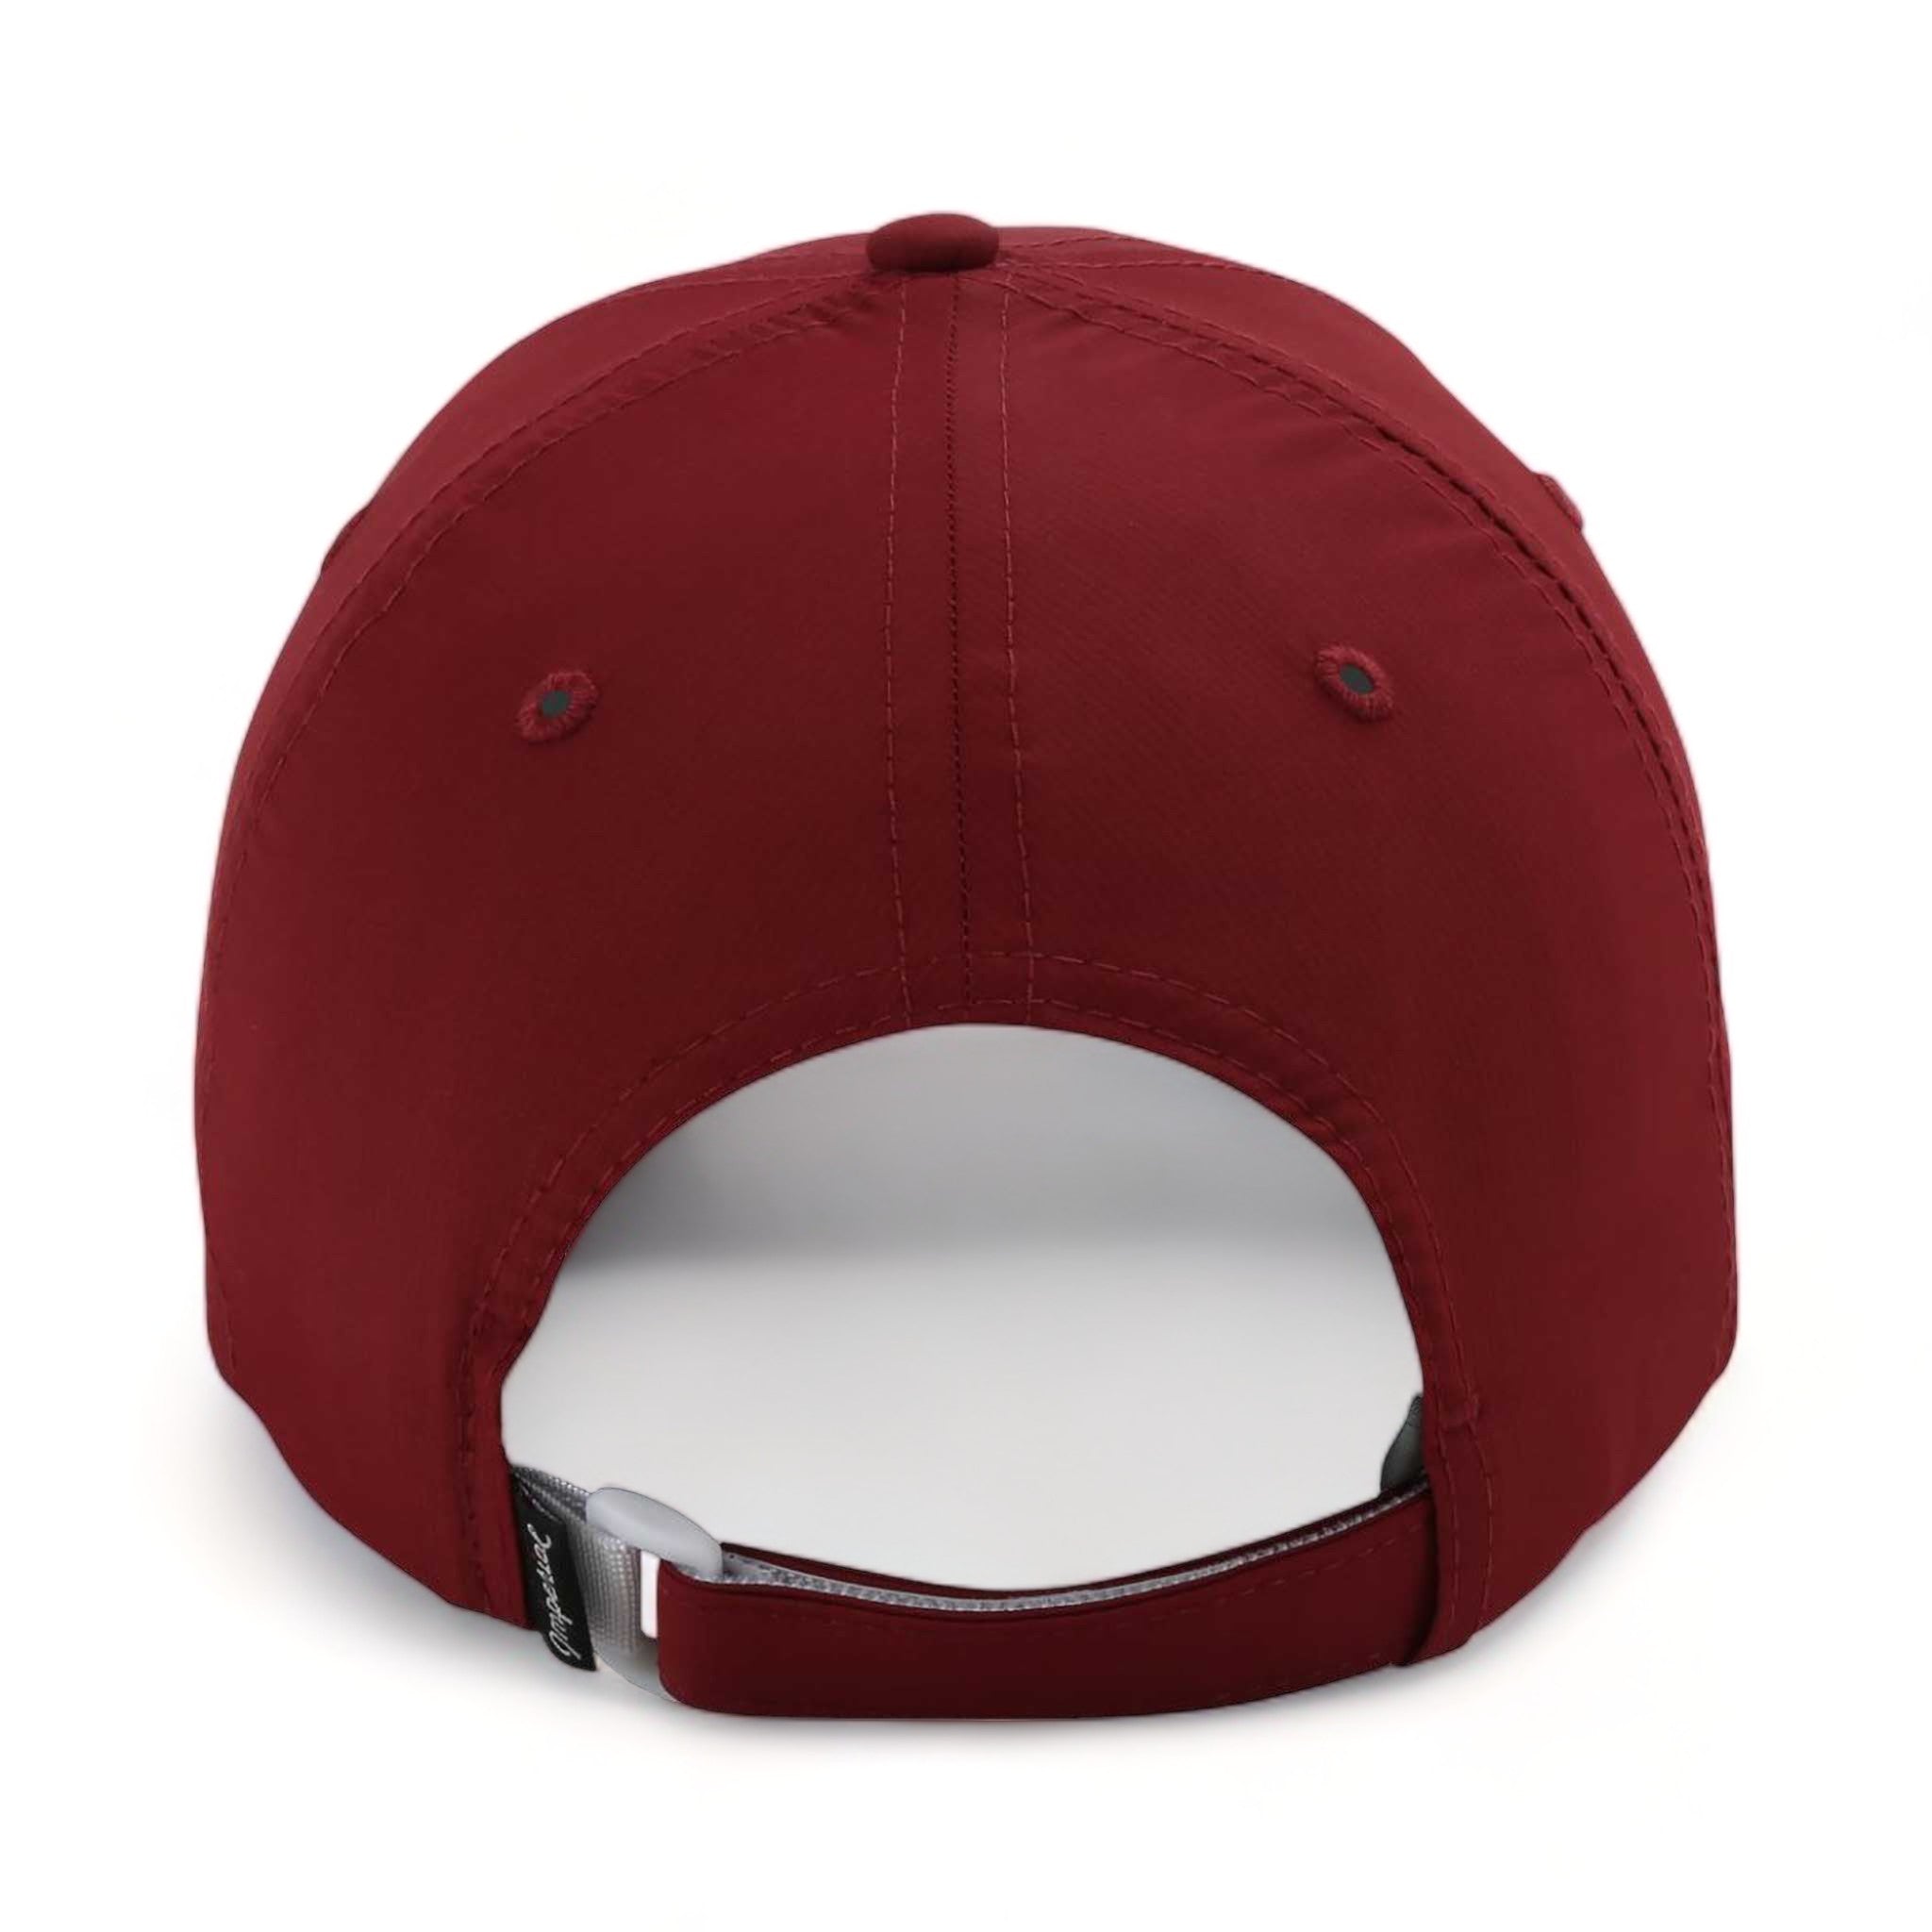 Back view of Imperial X210P custom hat in maroon